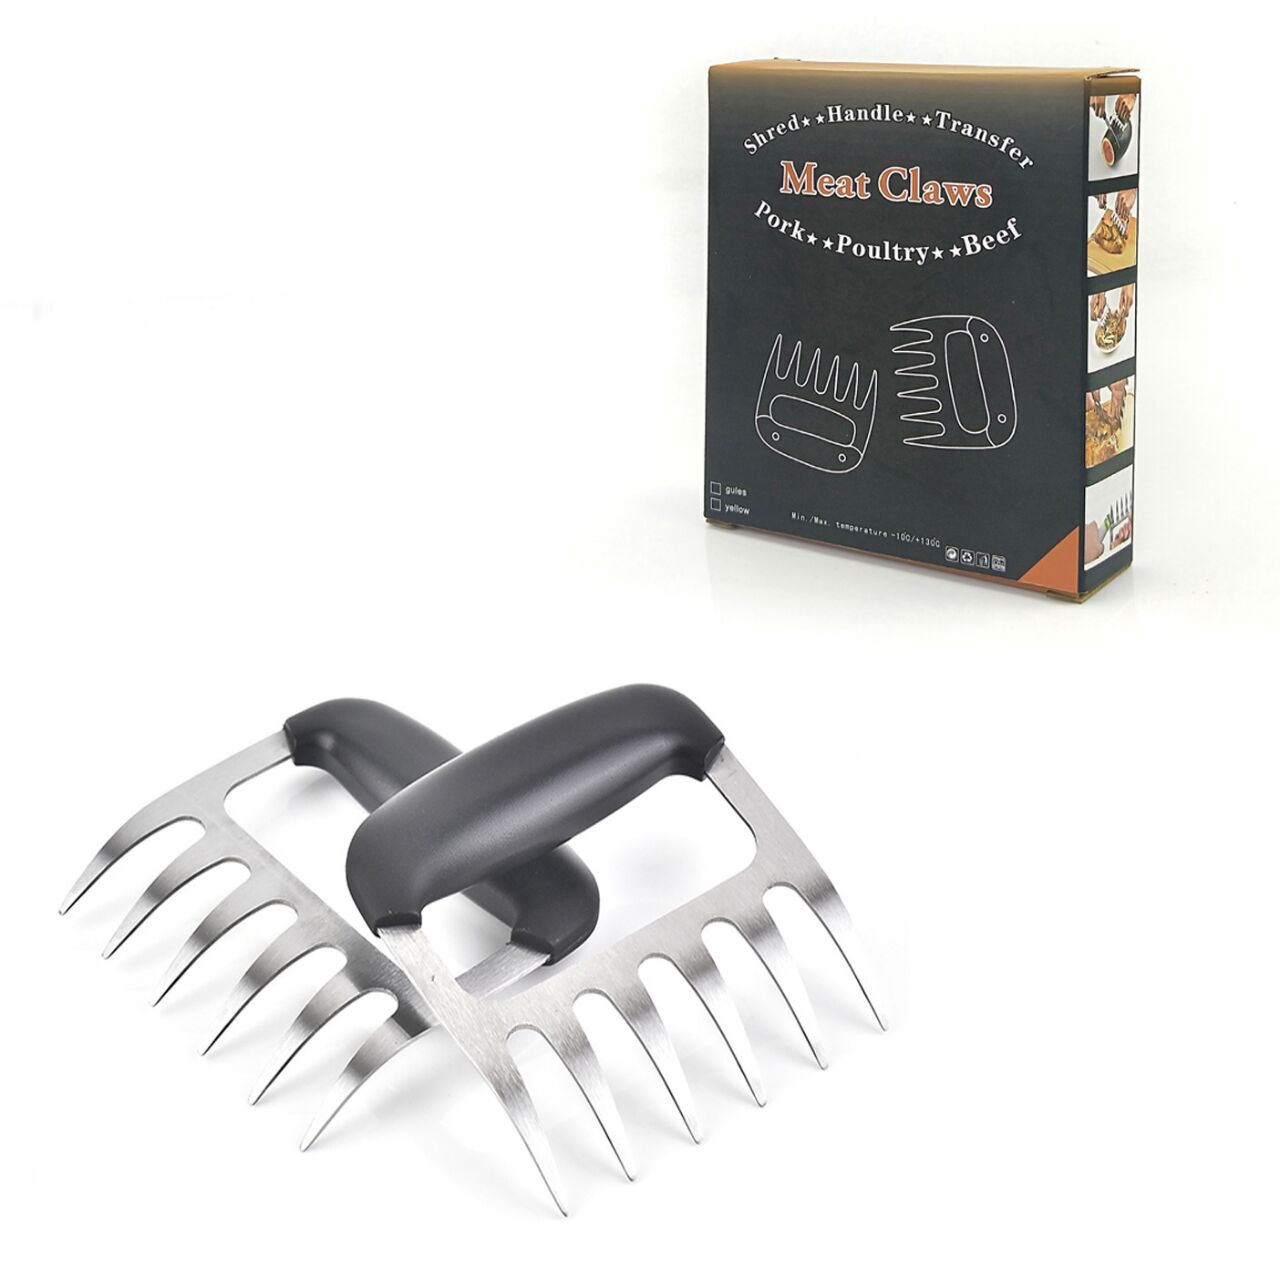 Meat Claws Pulled Pork Shredder Tools - Ultra-Sharp Stainless Steel Blades